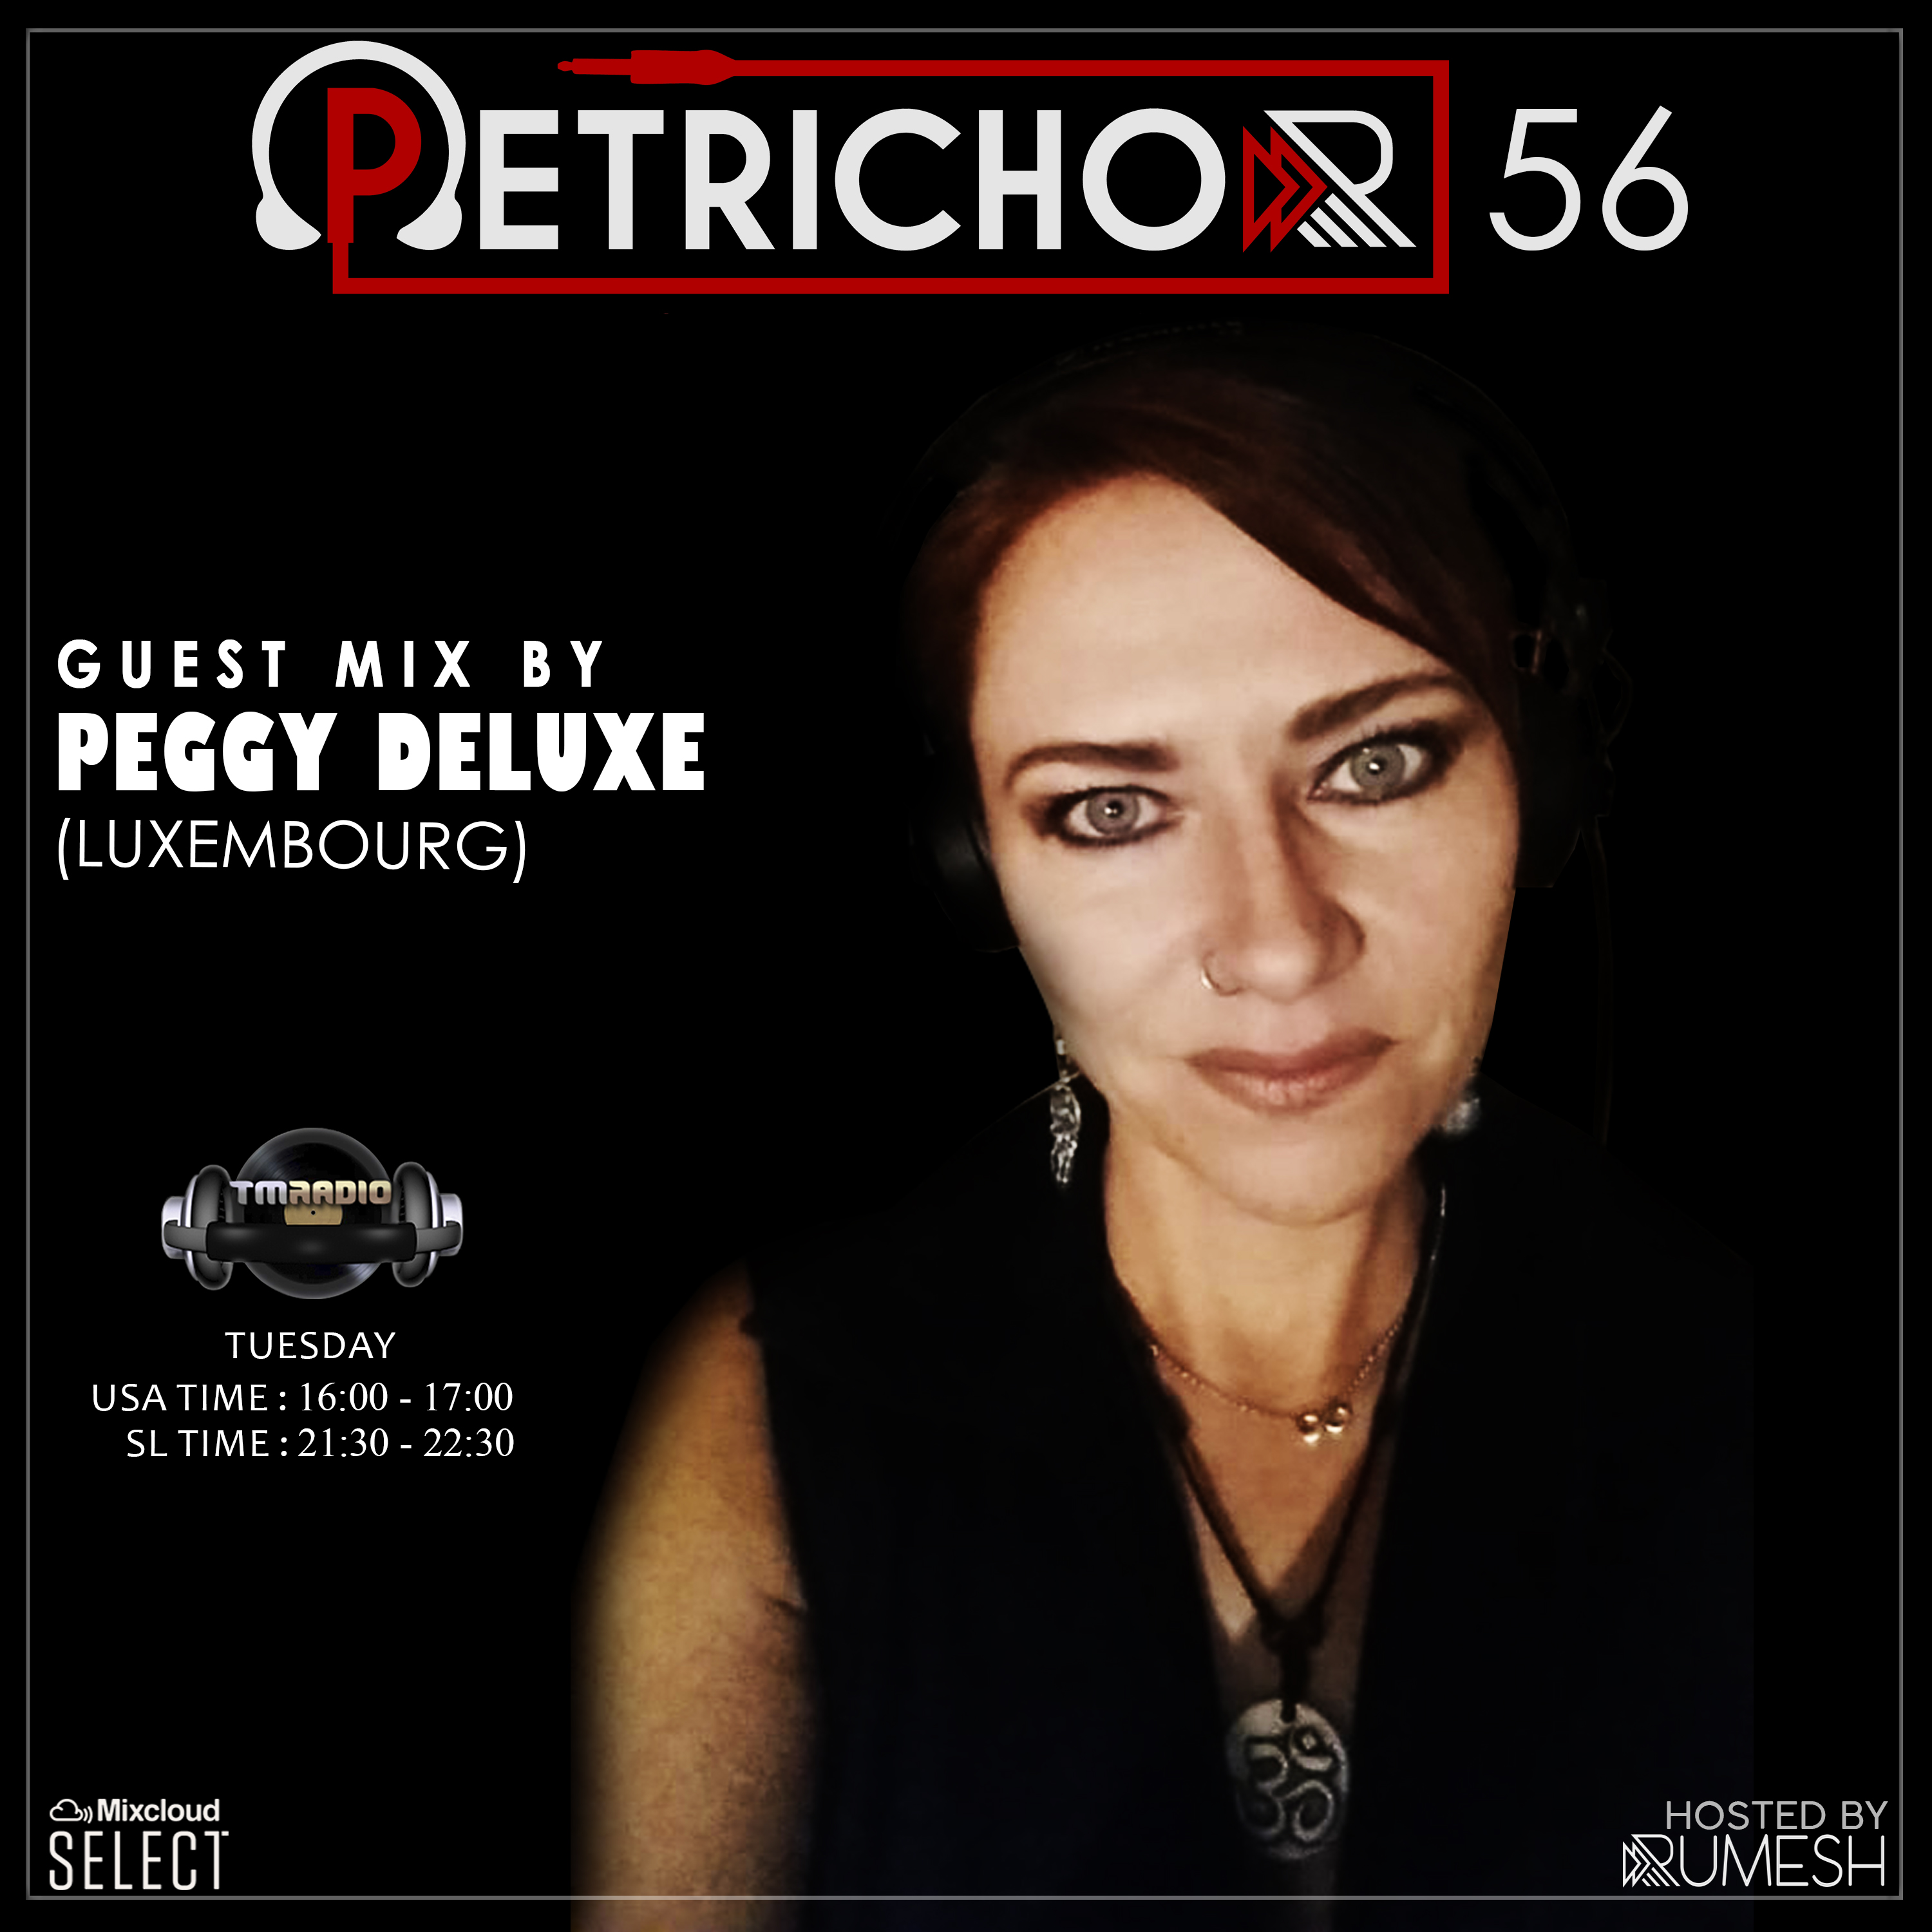 Petrichor :: Petrichor 56 guest mix by Peggy Deluxe (Luxembourg) (aired on December 3rd, 2019) banner logo